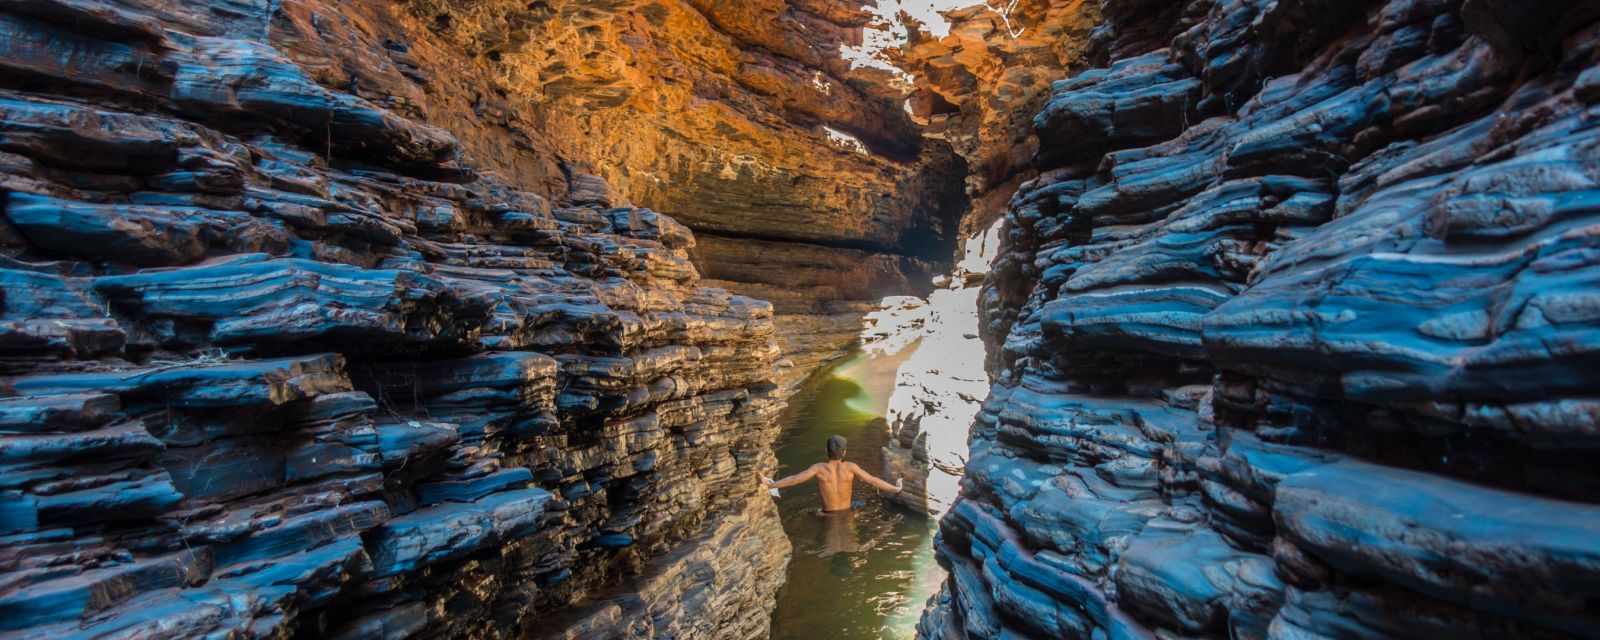 Hiking and Camping in the Karijini National Park - 6 Gorges and 9 Tips